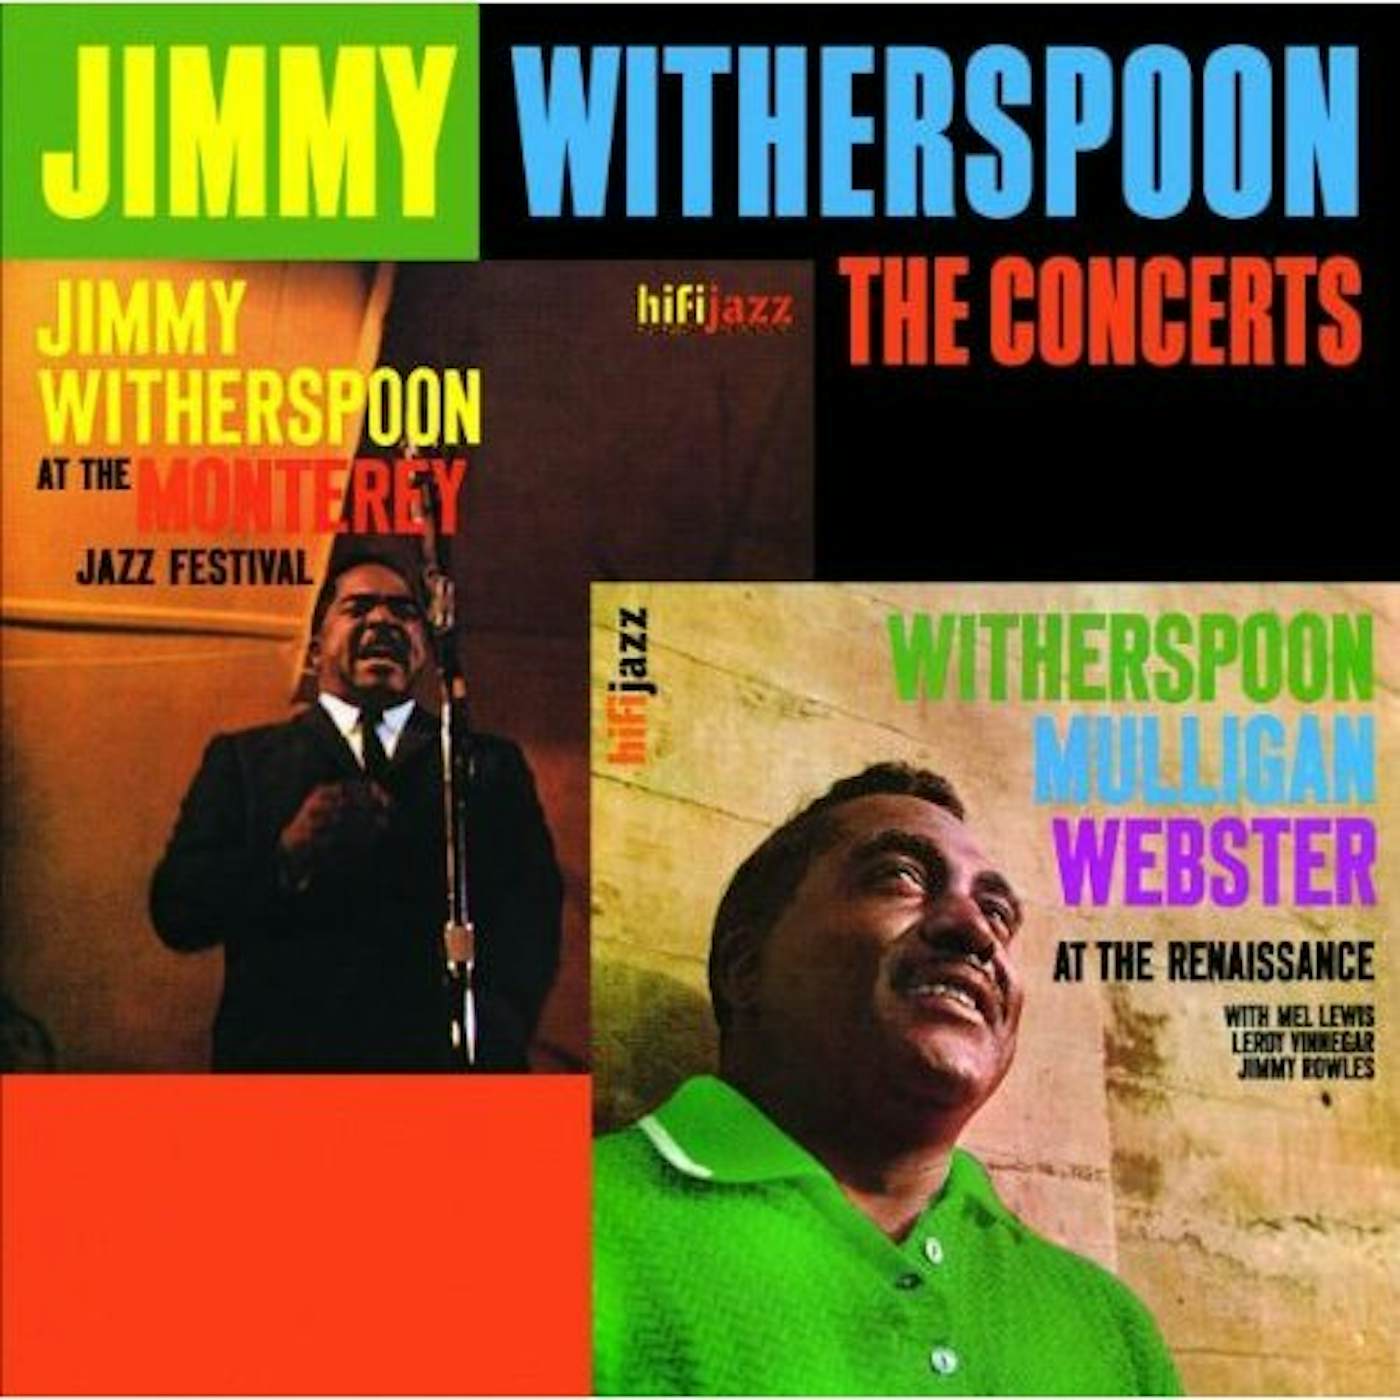 Jimmy Witherspoon SPOON CONCERTS CD